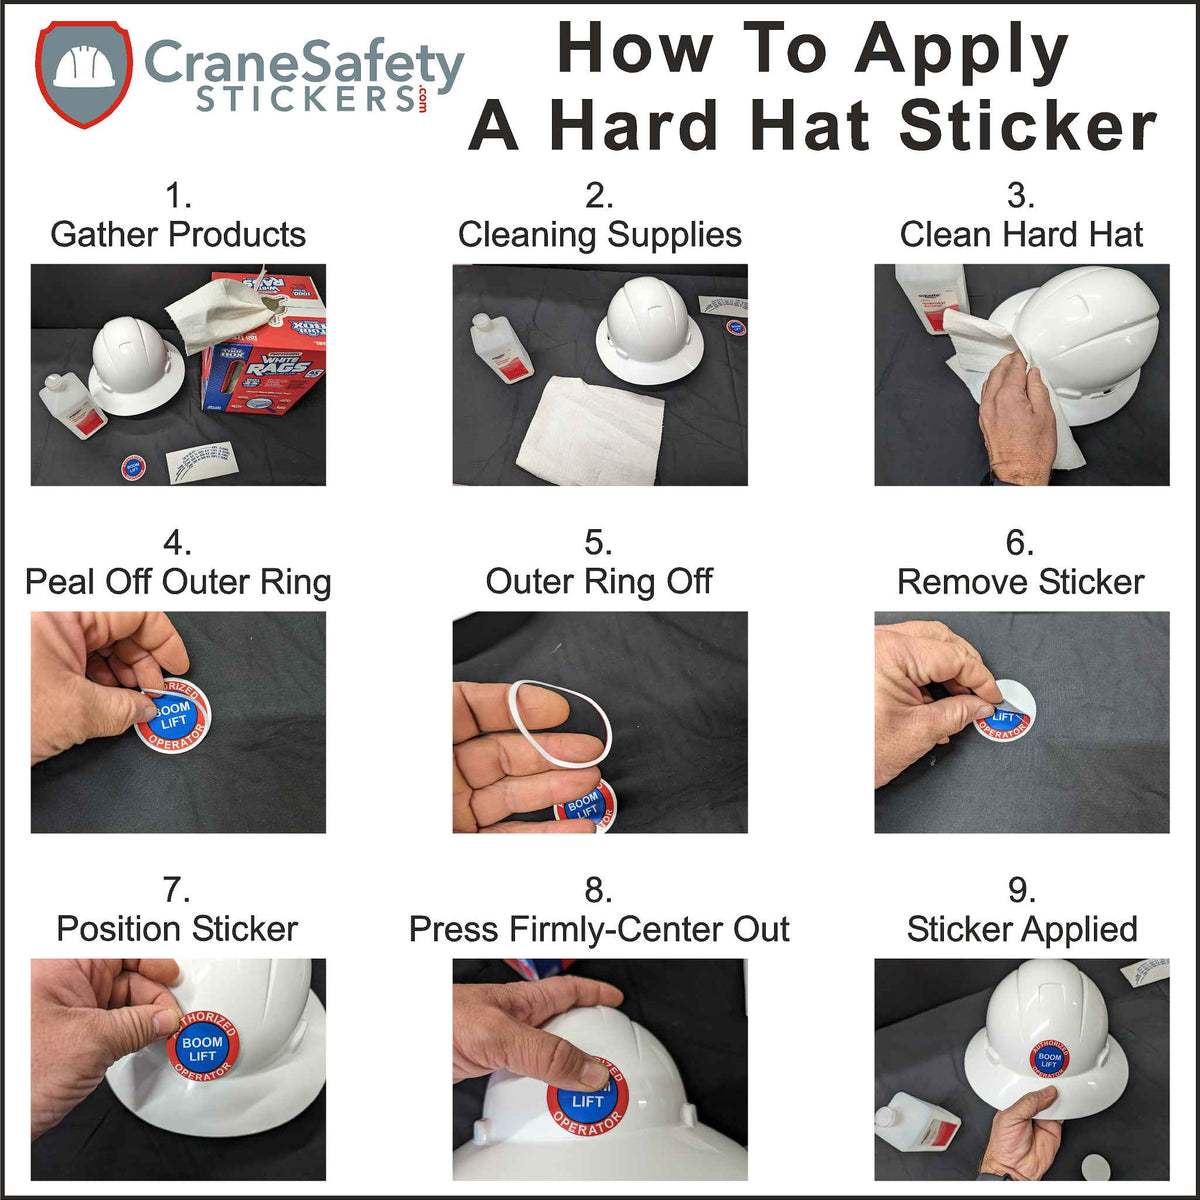 Directions on how to apply an i am a safe worker sticker to a hard hat.